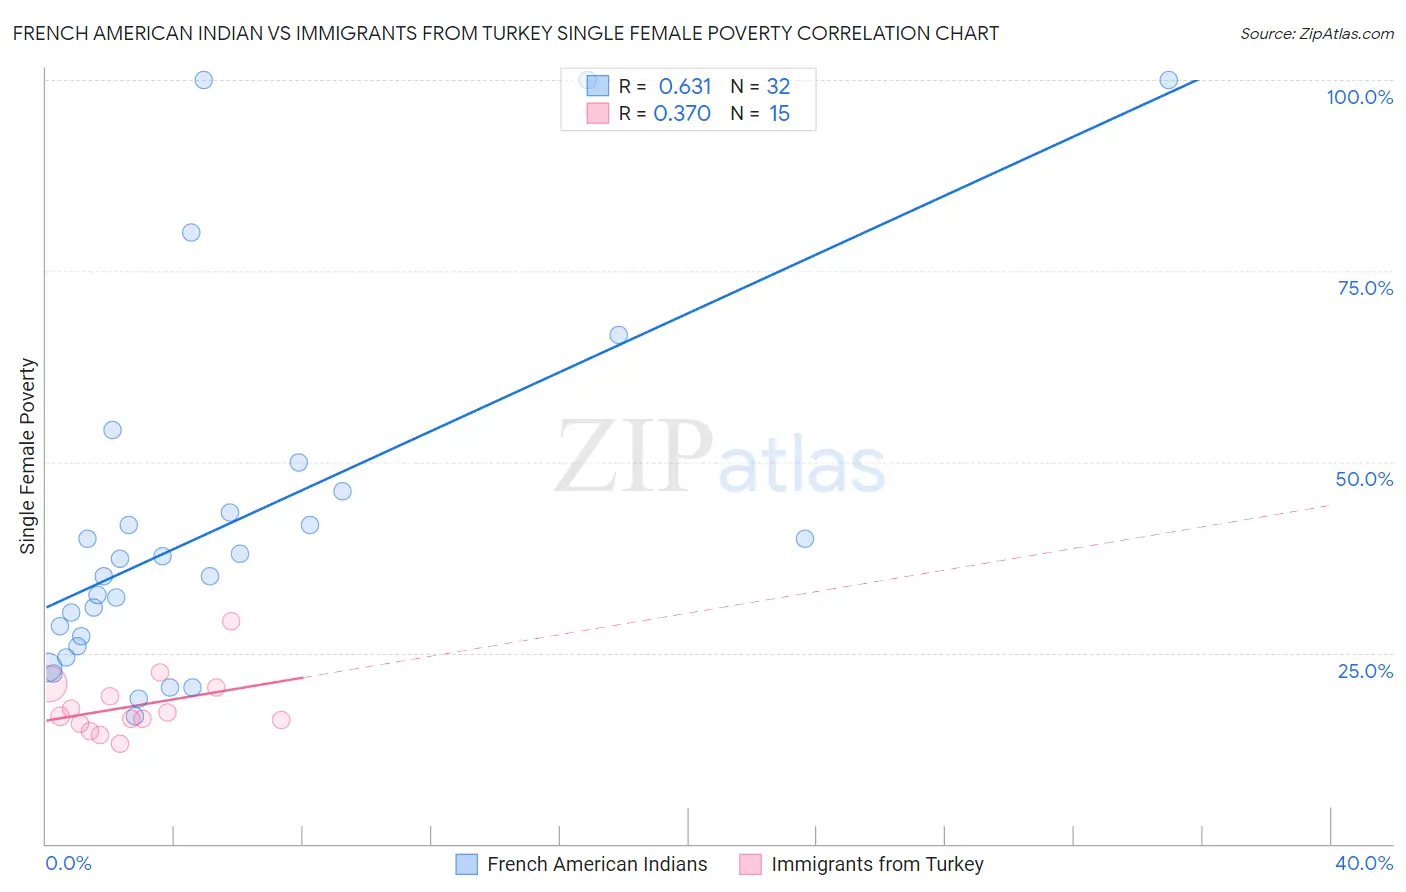 French American Indian vs Immigrants from Turkey Single Female Poverty